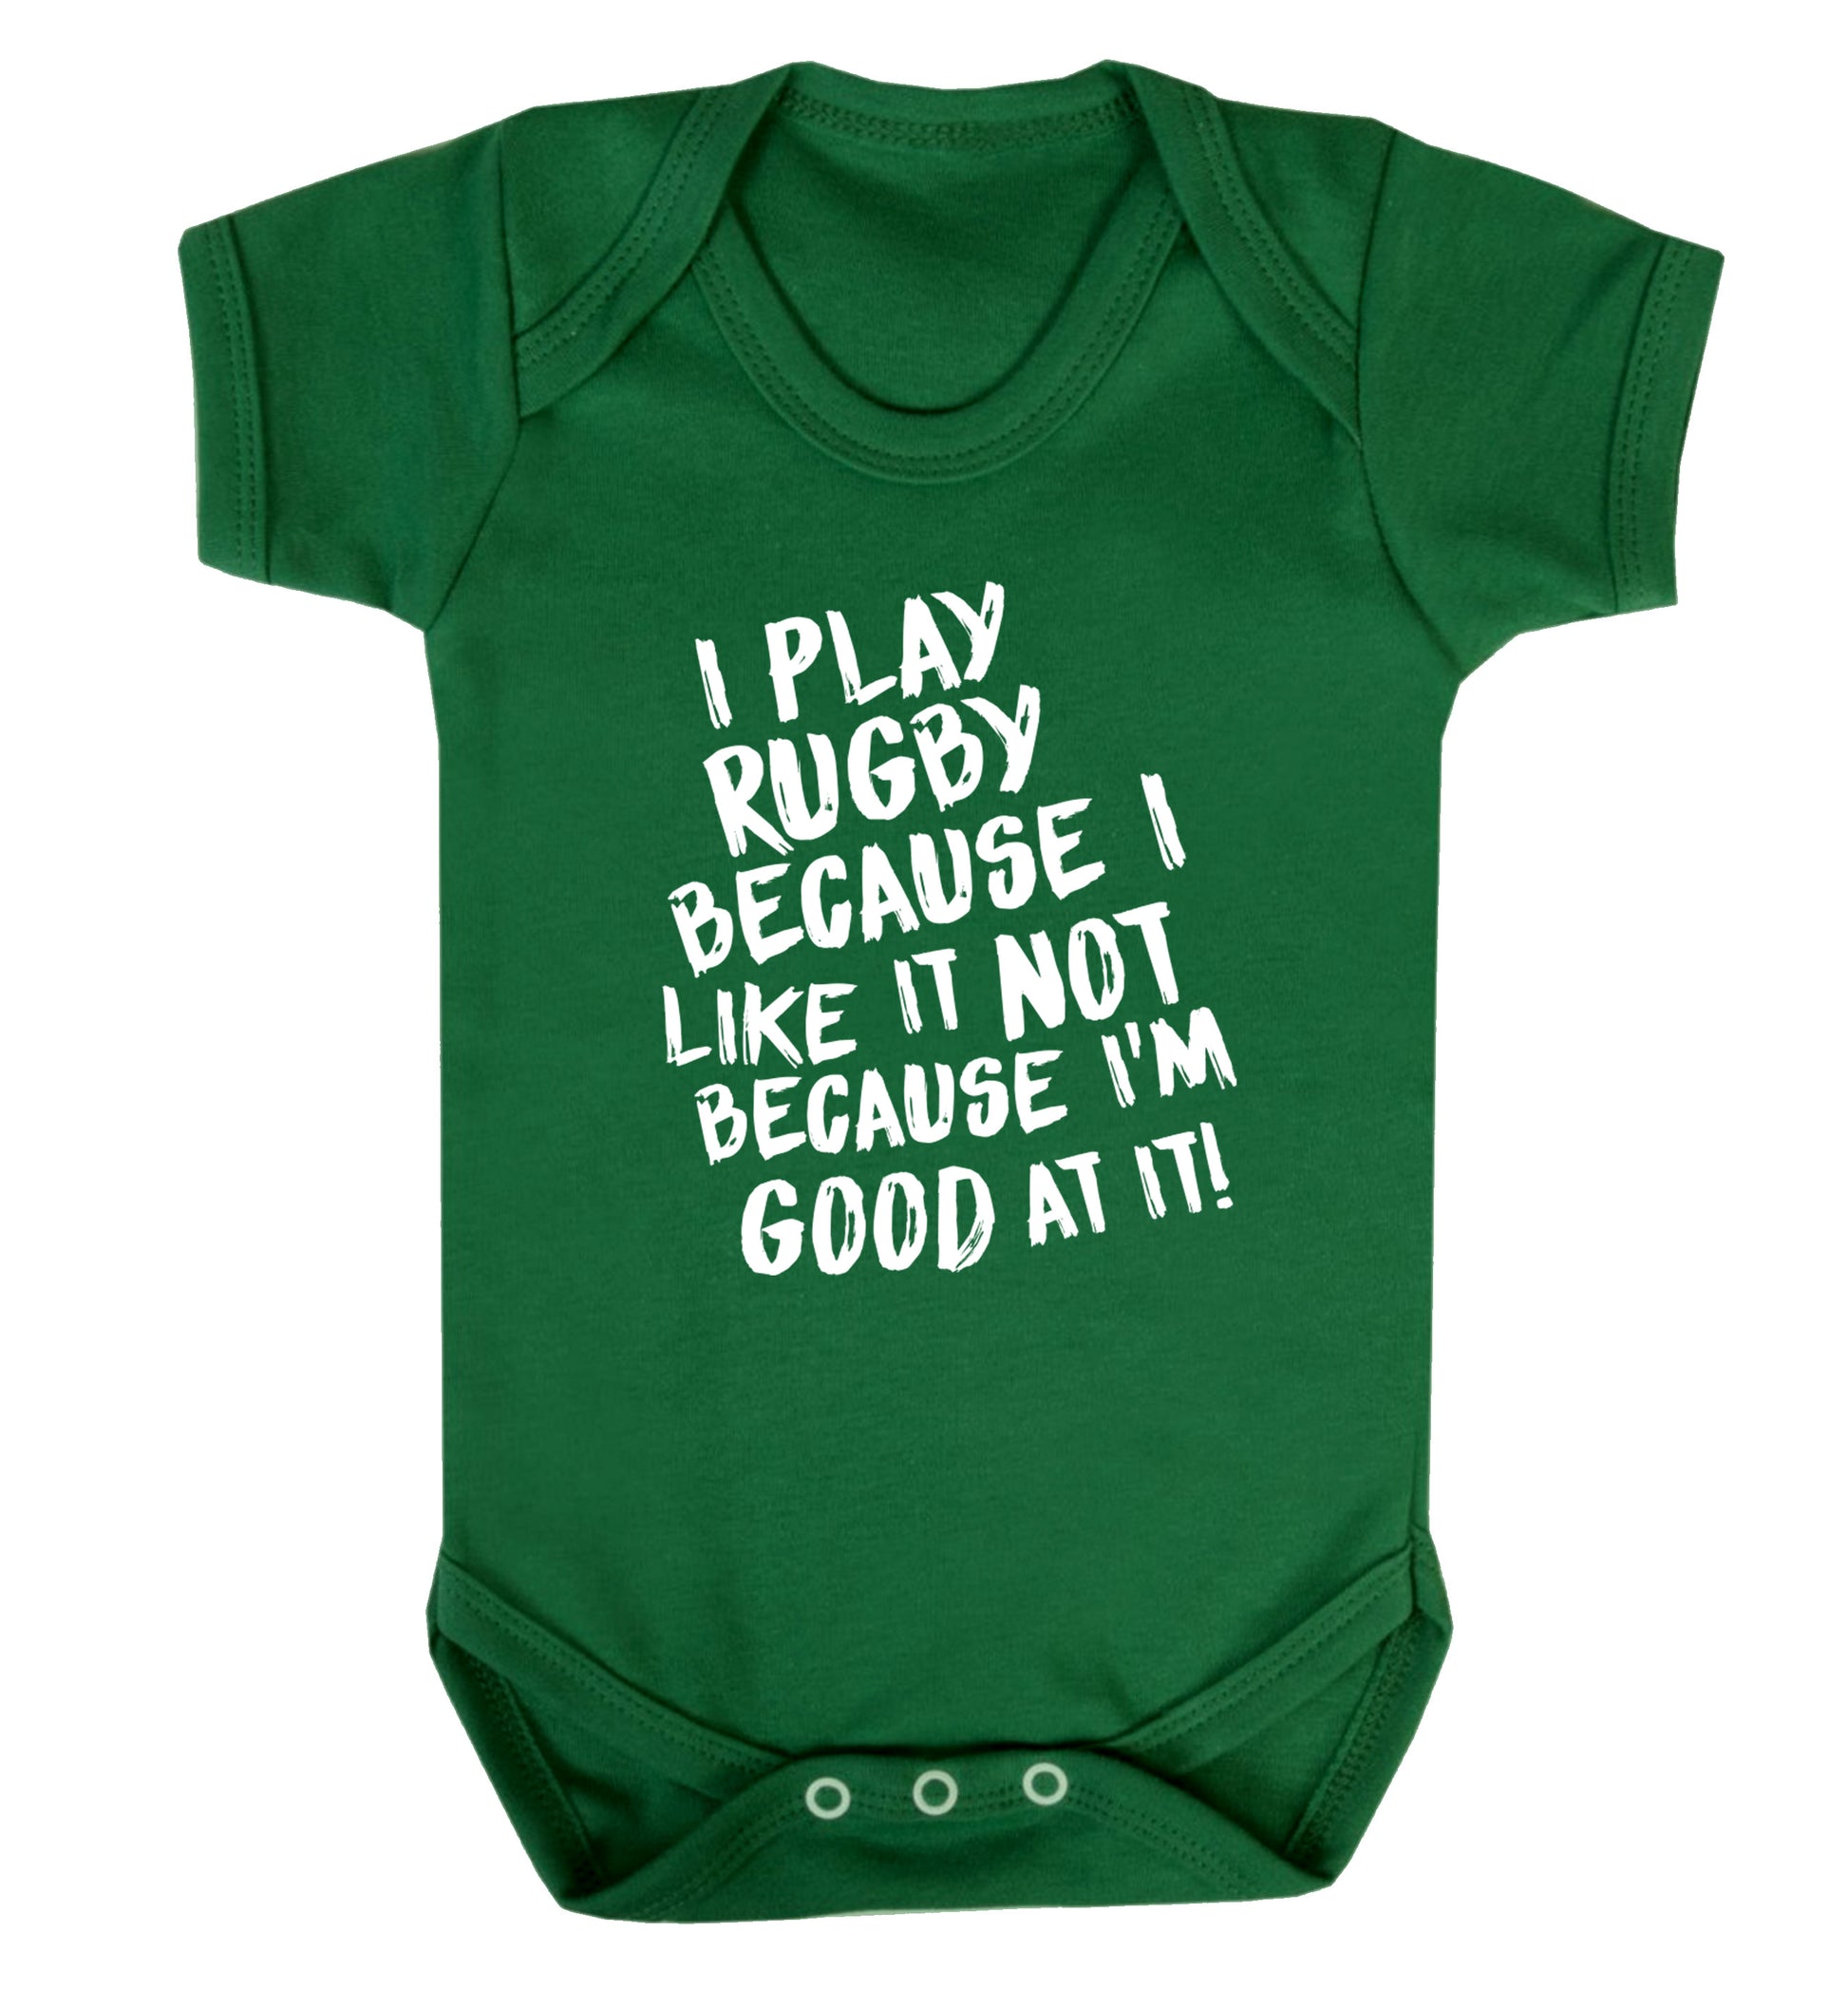 I play rugby because I like it not because I'm good at it Baby Vest green 18-24 months